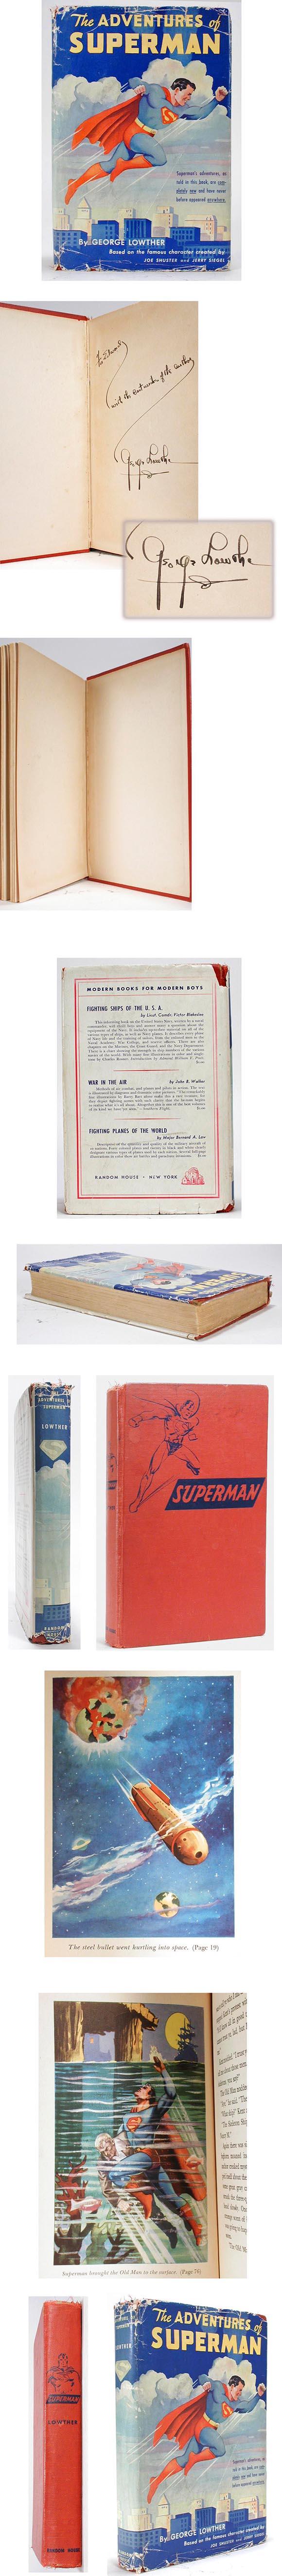 1942 The Adventures of Superman, Signed Hard Cover Book with Original Dust Jacket